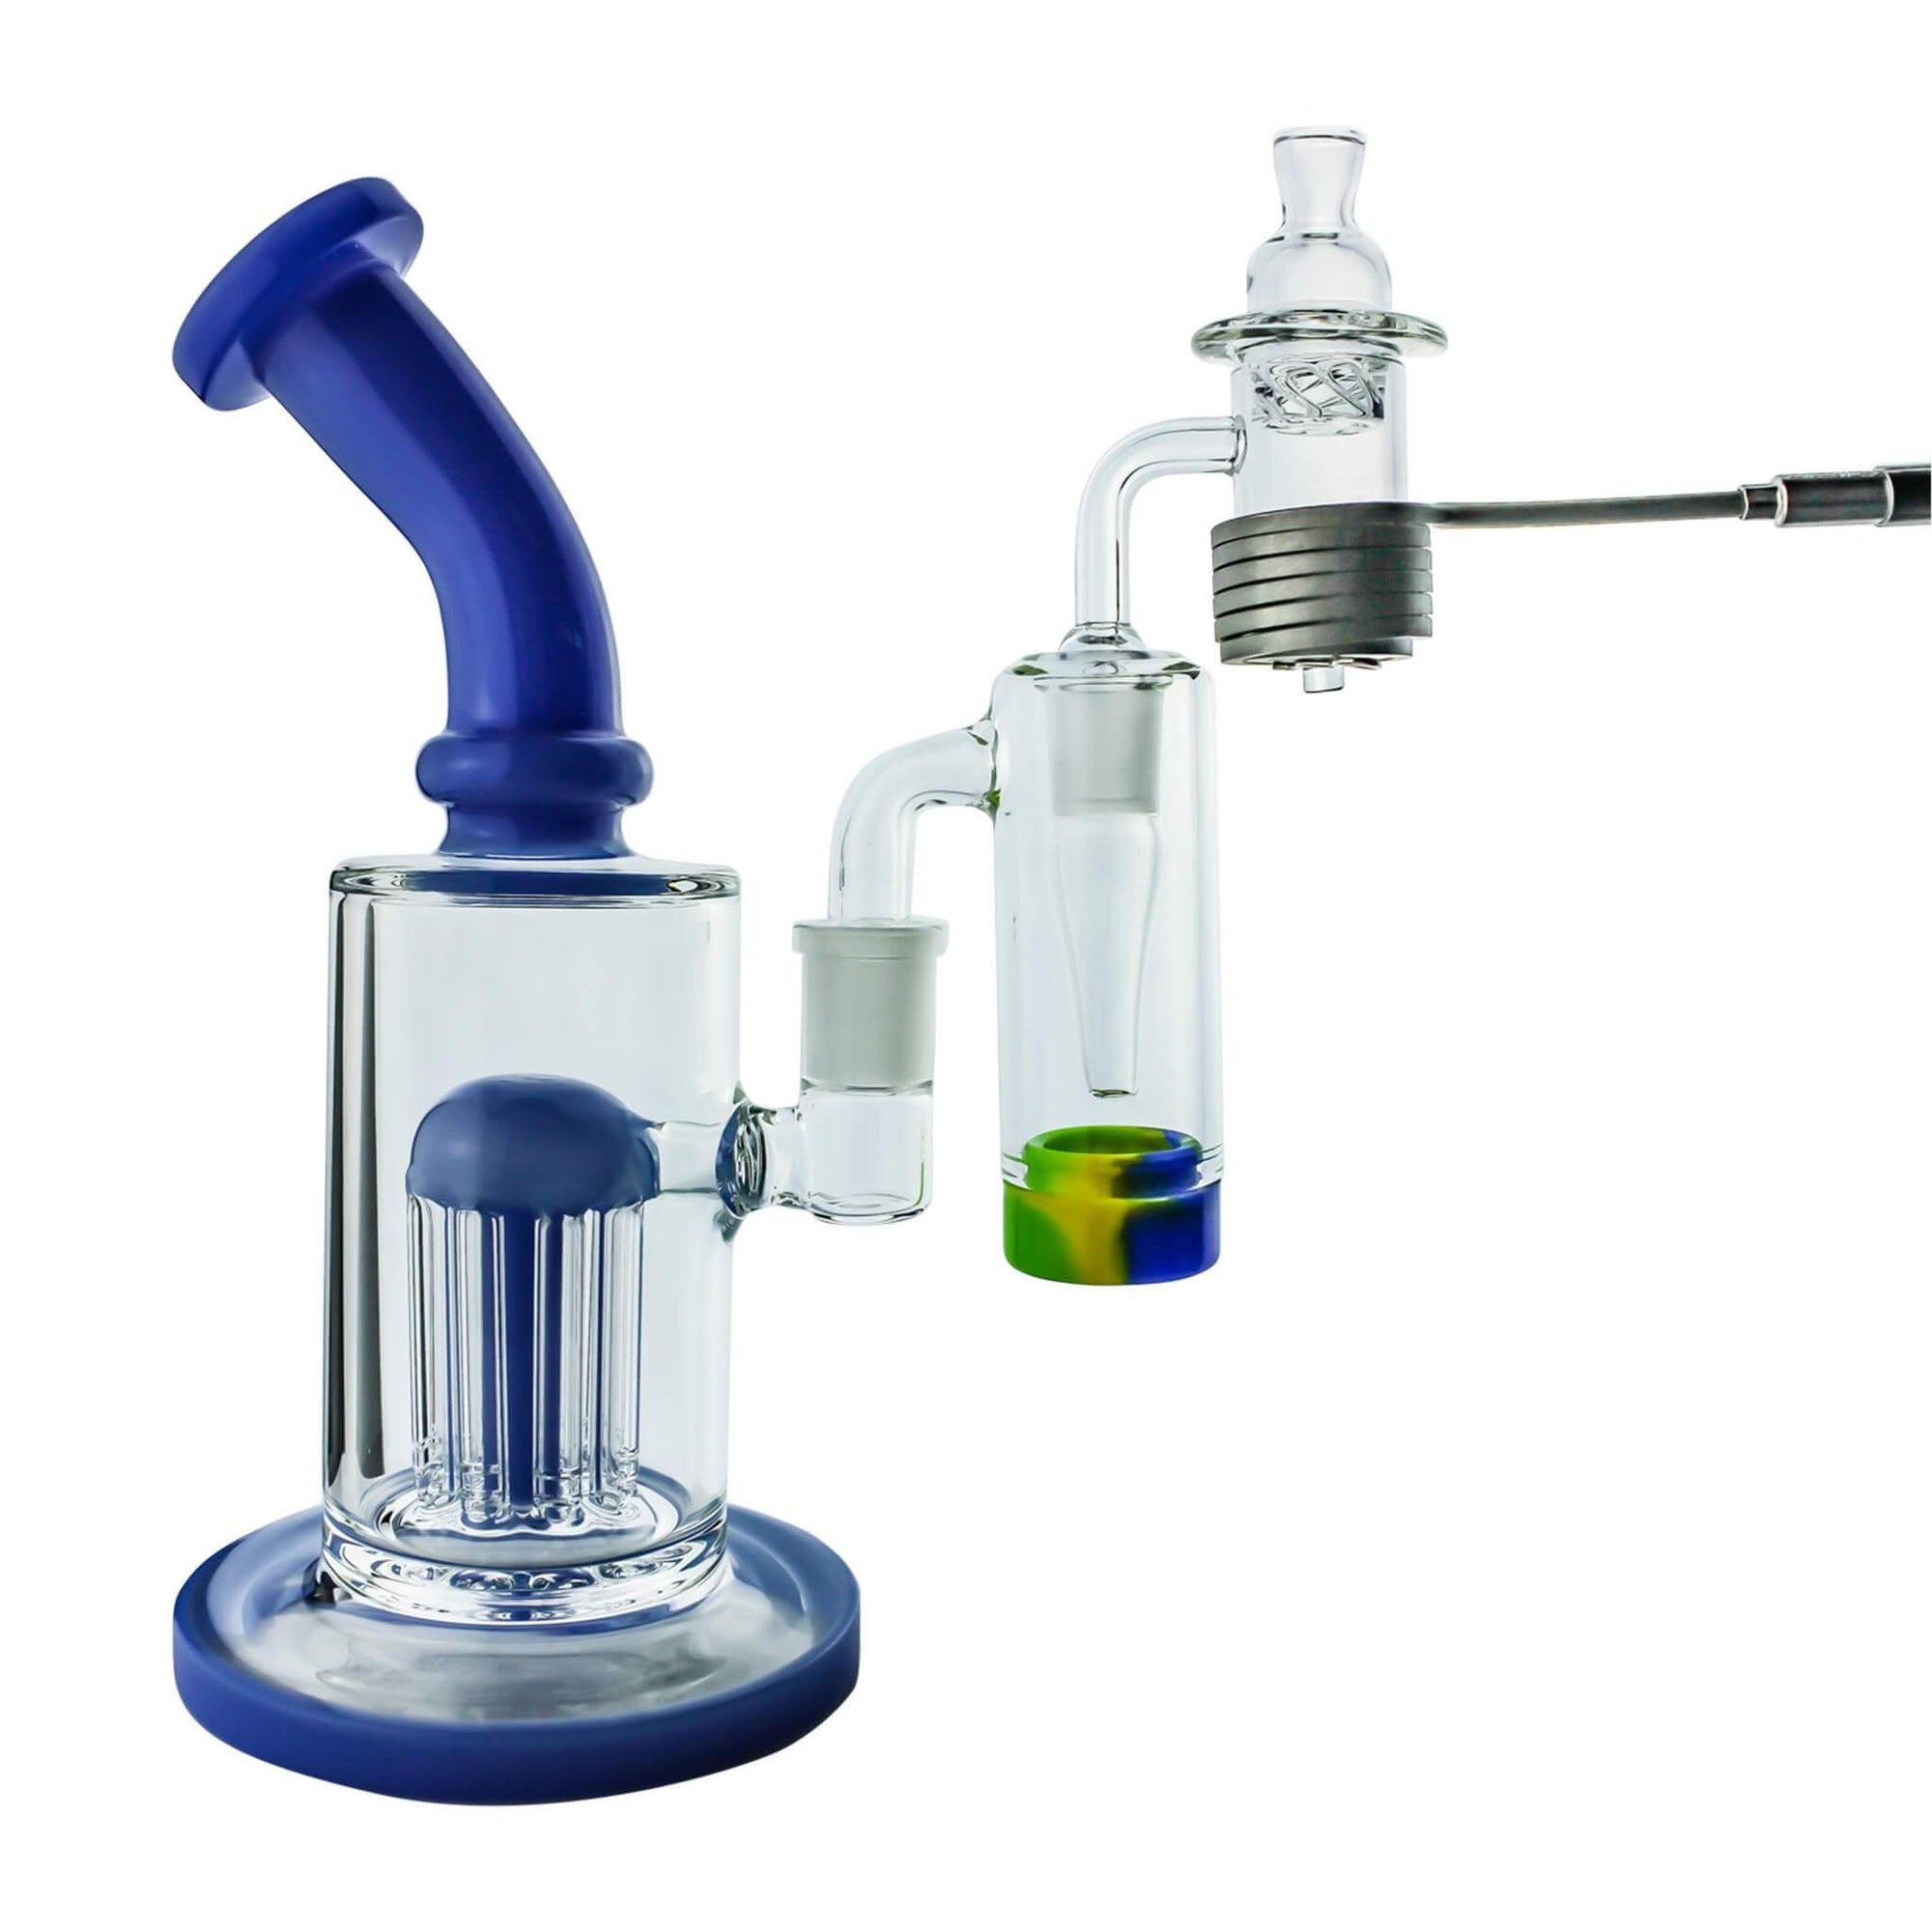 Spin Matrix 25mm Enail Complete Dabbing Kit #1 | Full Kit In Use With Reclaim Catcher View | DW